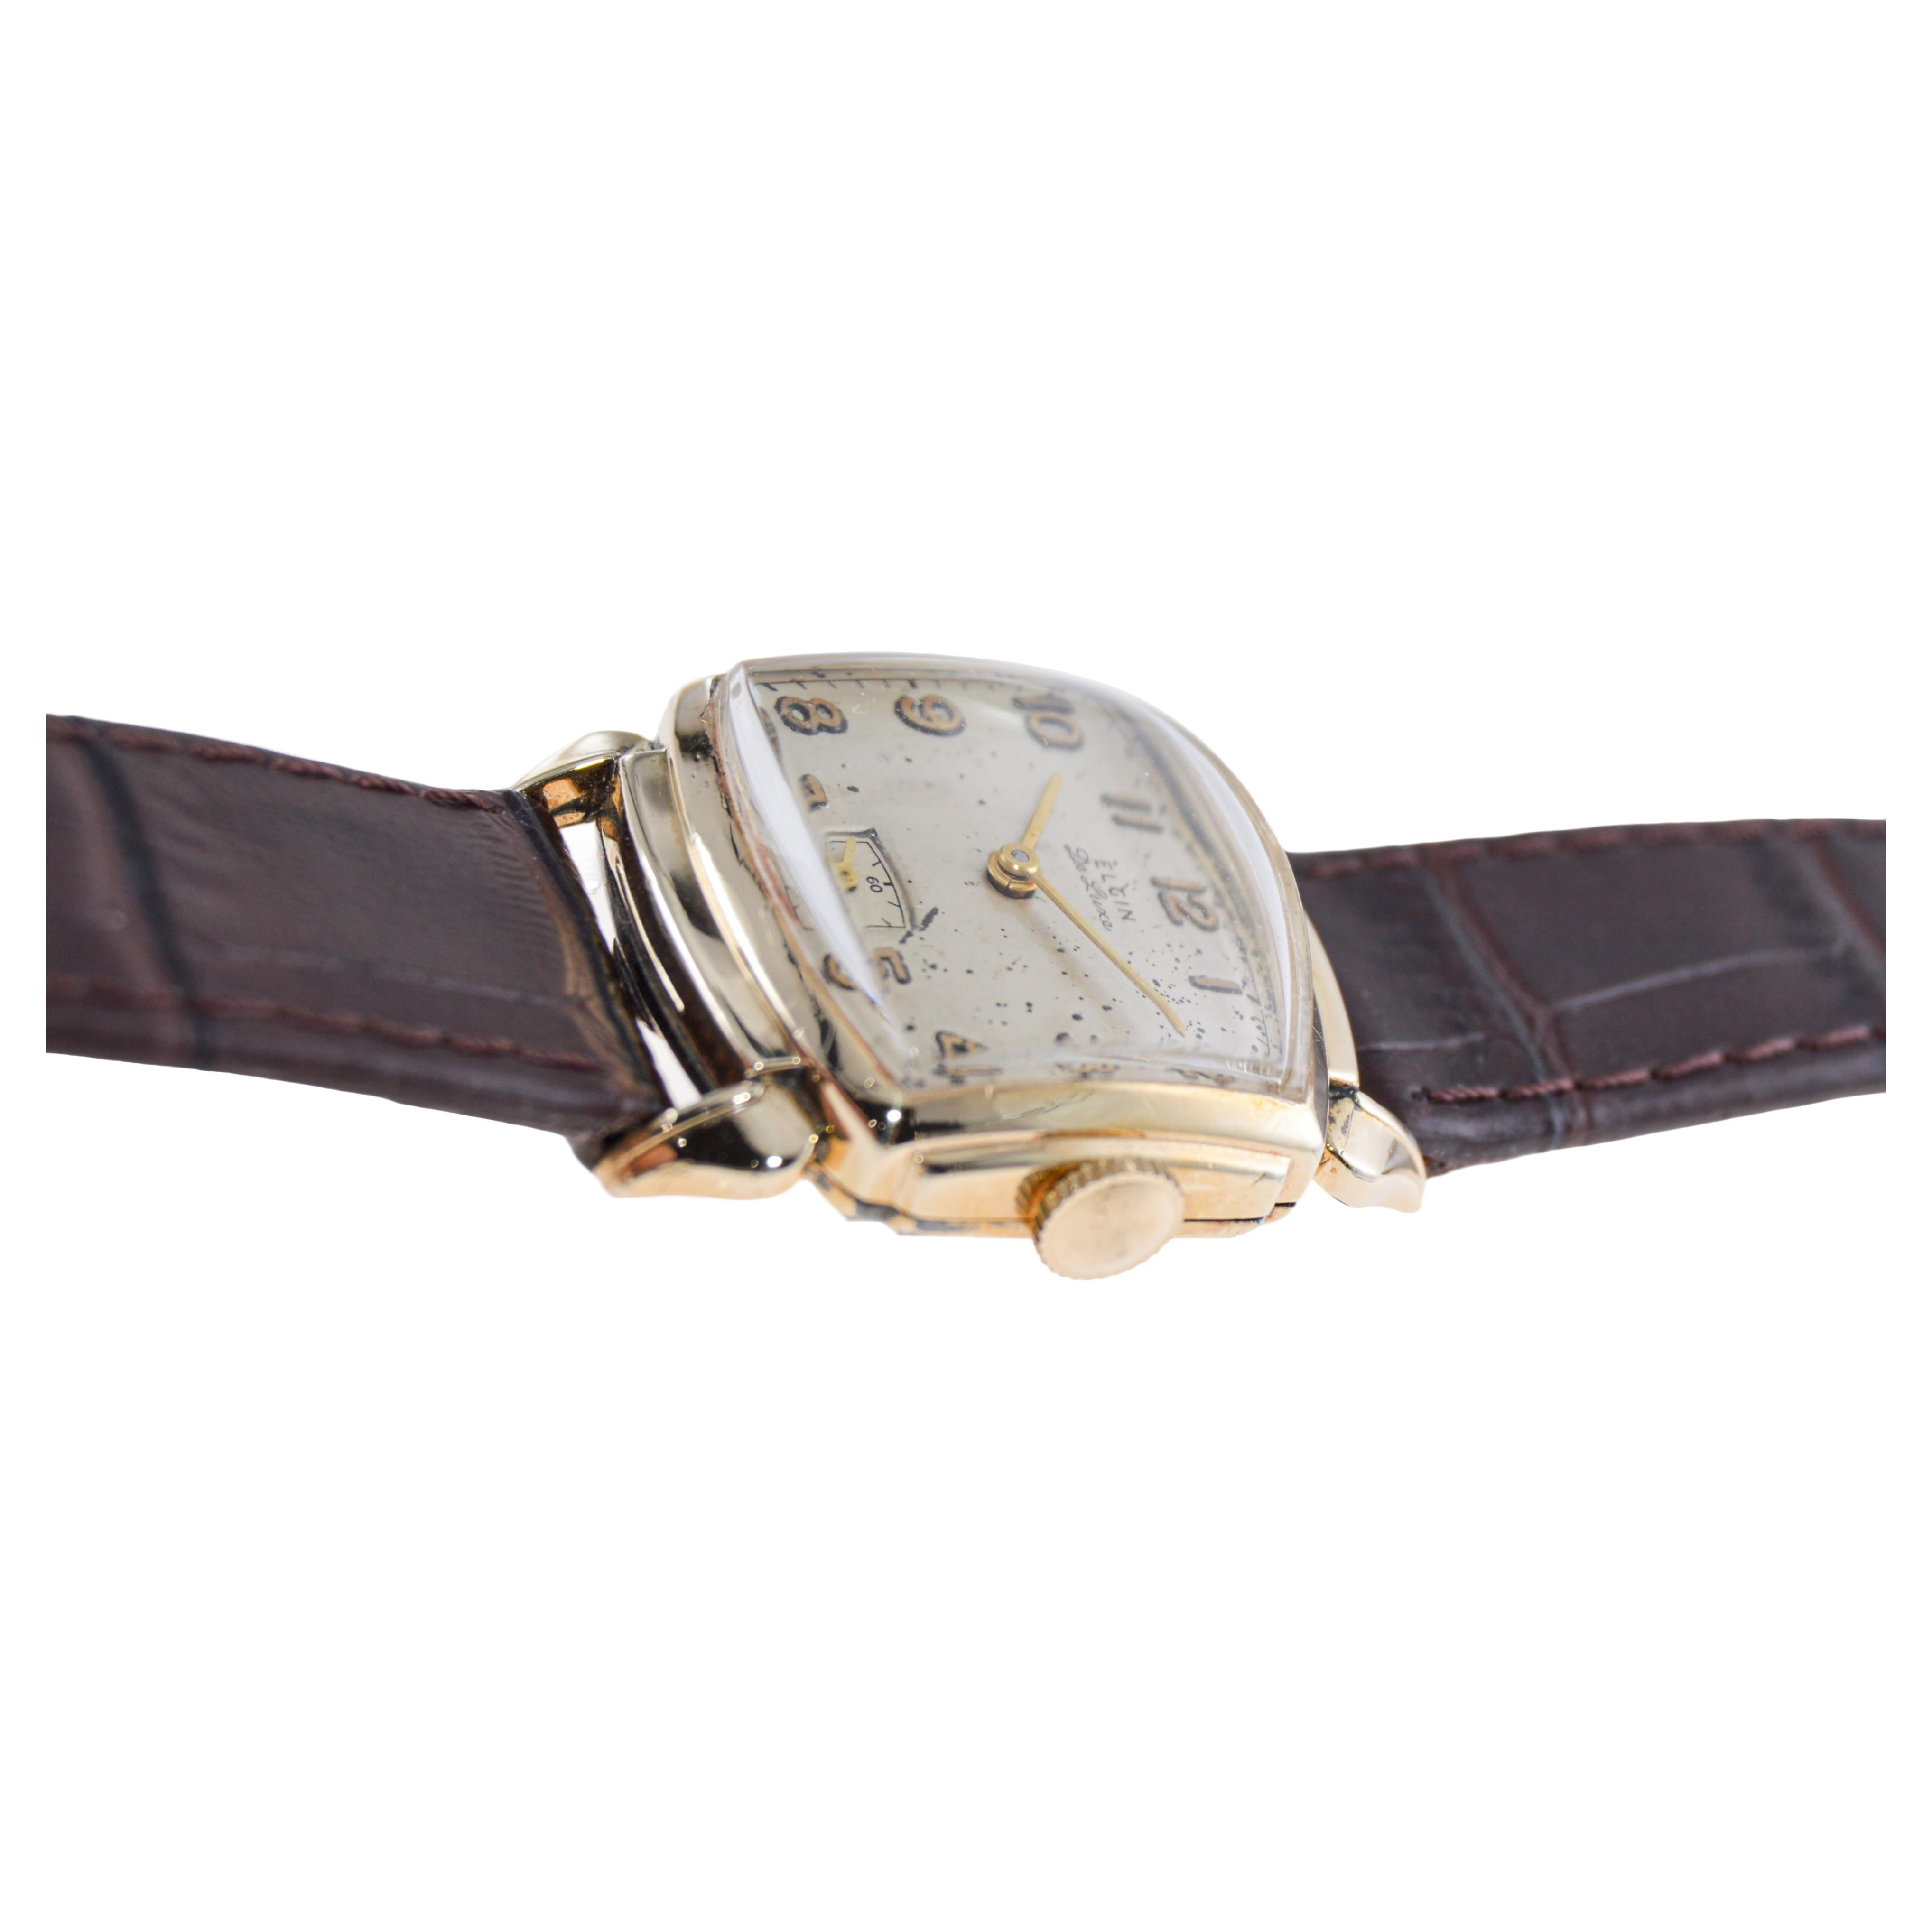 Elgin Yellow Gold Filled Art Deco Watch with Original Dial from the 1940's For Sale 2